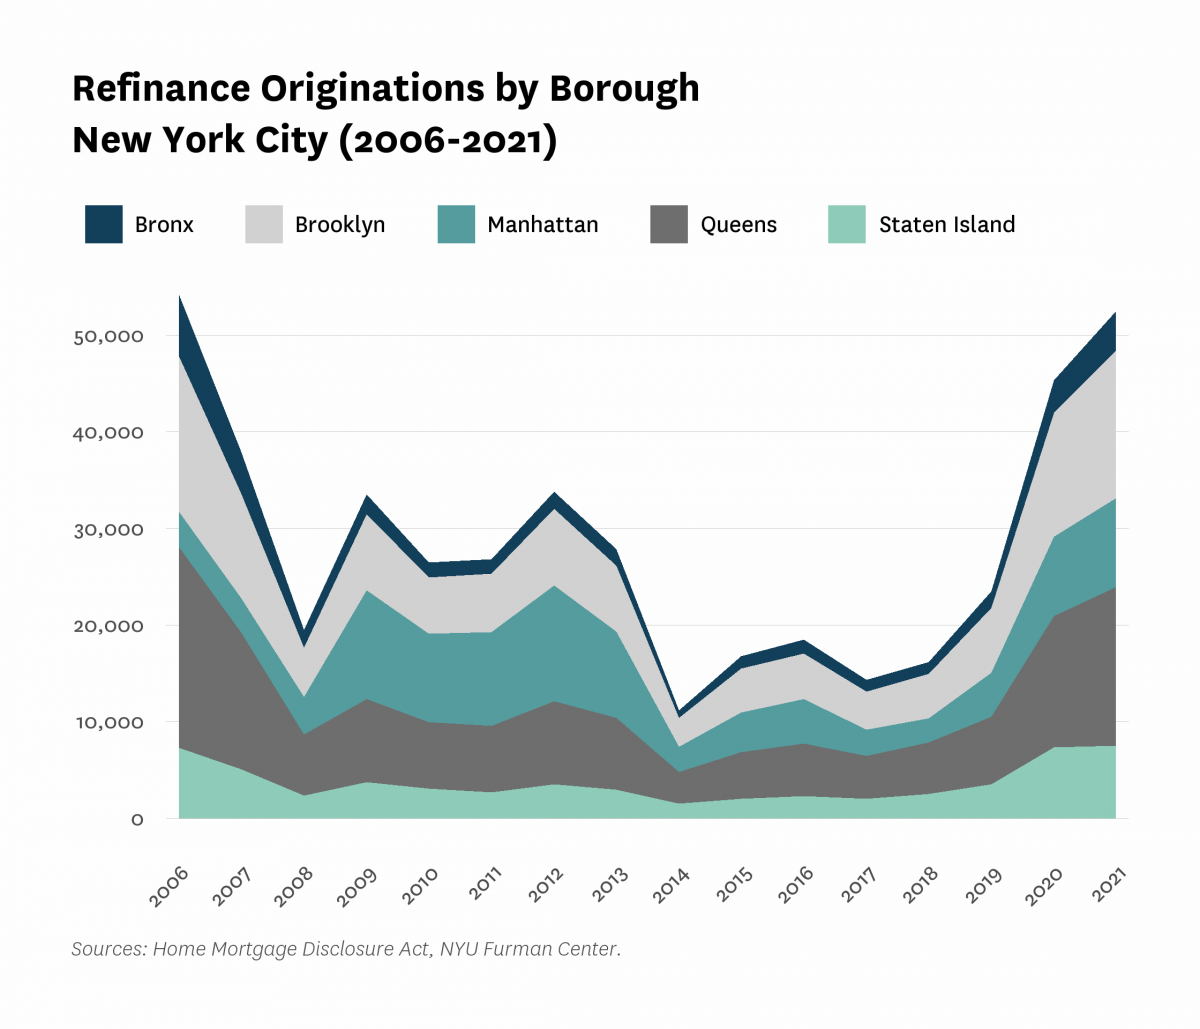 Area chart showing refinance originations by borough in New York City from 2006 to 2021.